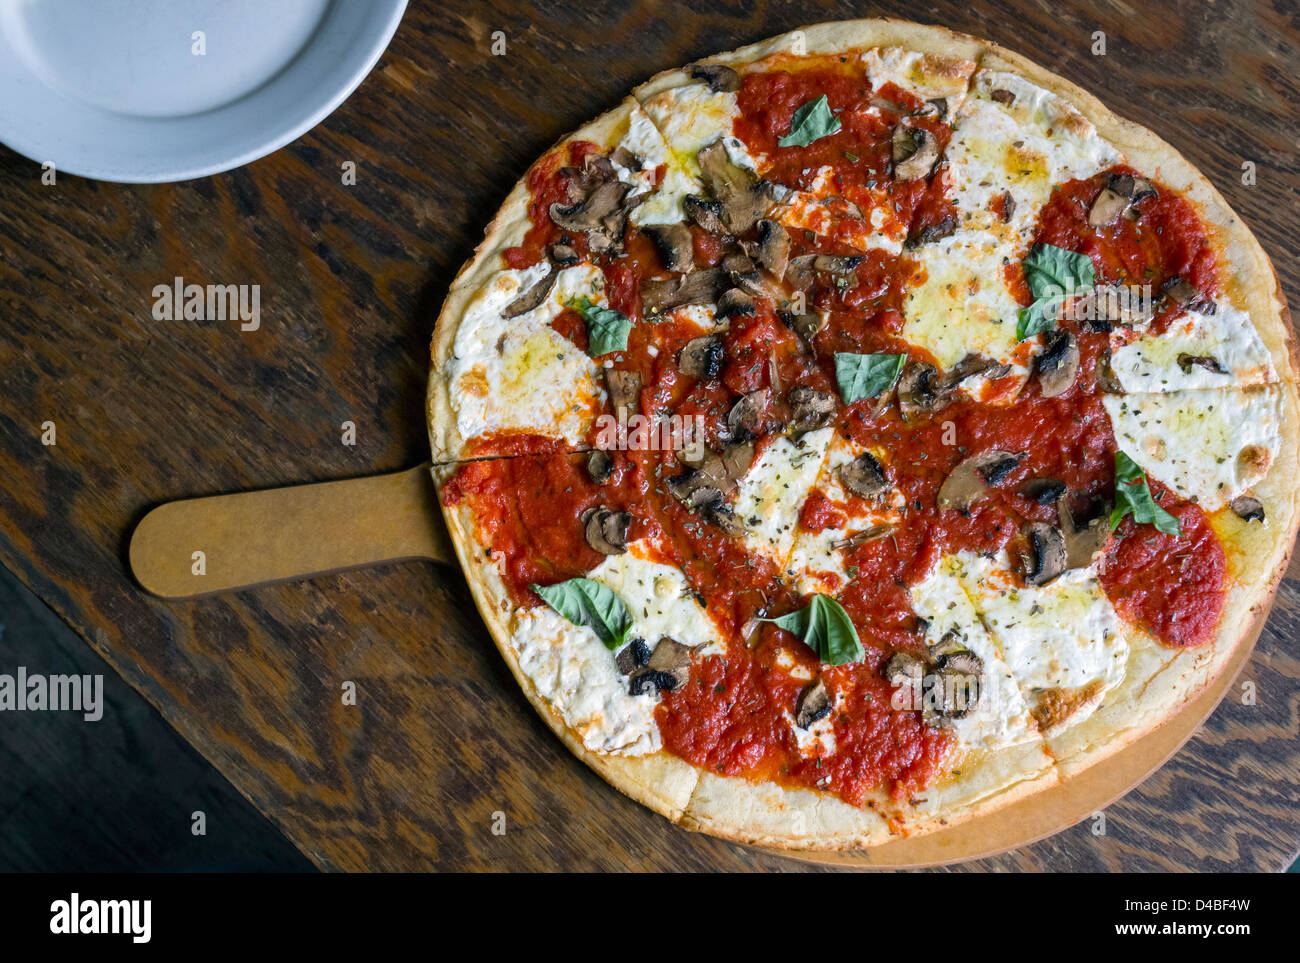 Brick oven pizza with cheese, tomato sauce, basil and mushrooms Stock Photo